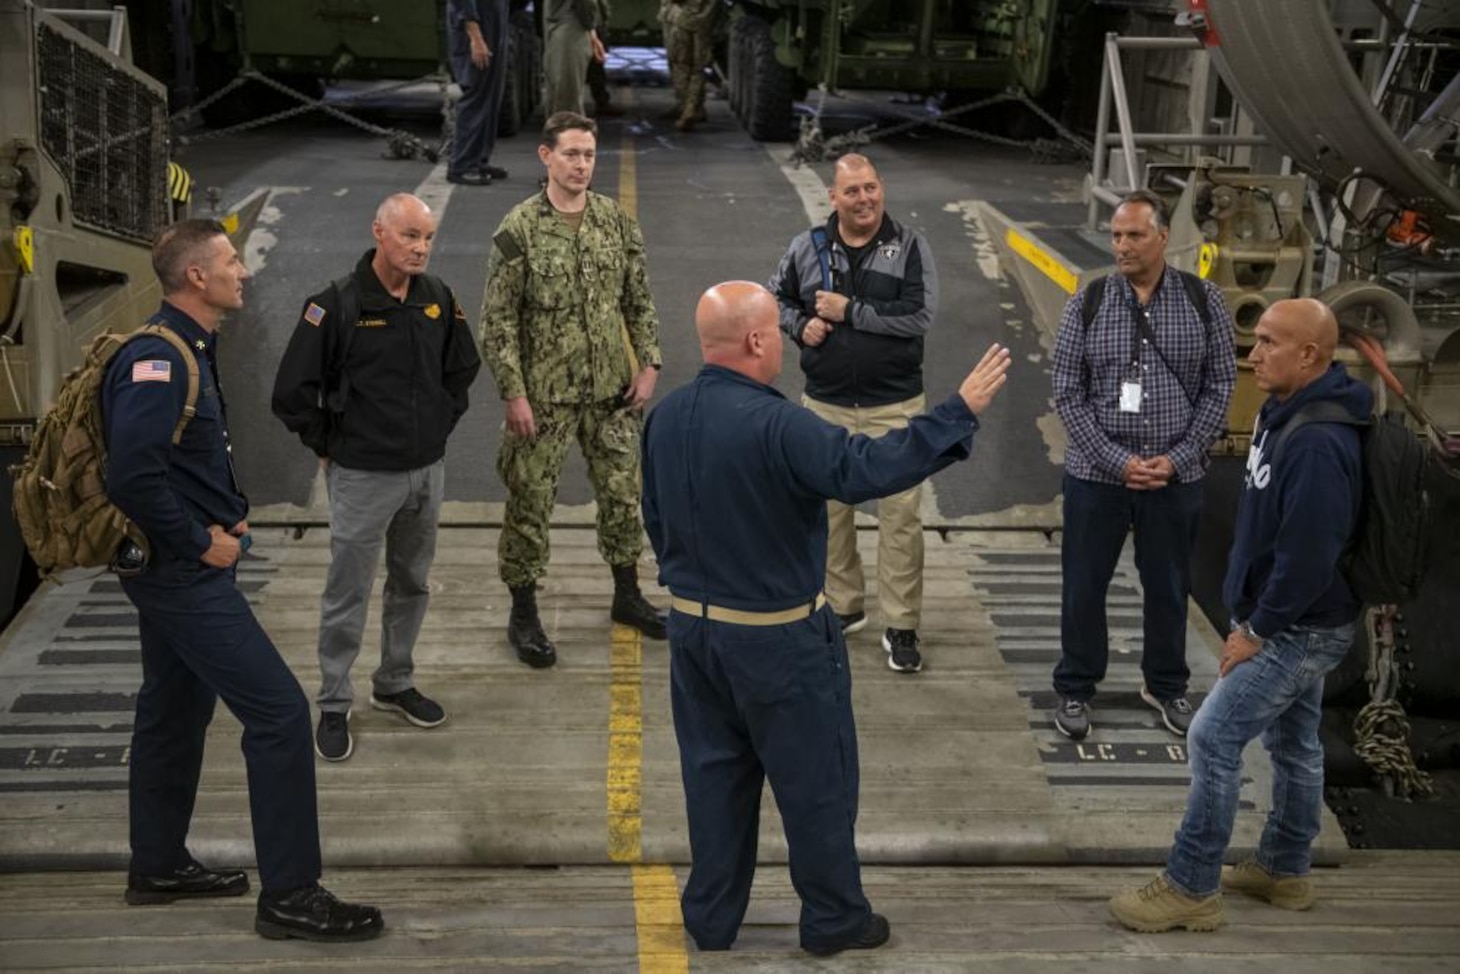 USS Anchorage (LPD 23) Welcomes “Leaders to Sea” Participants